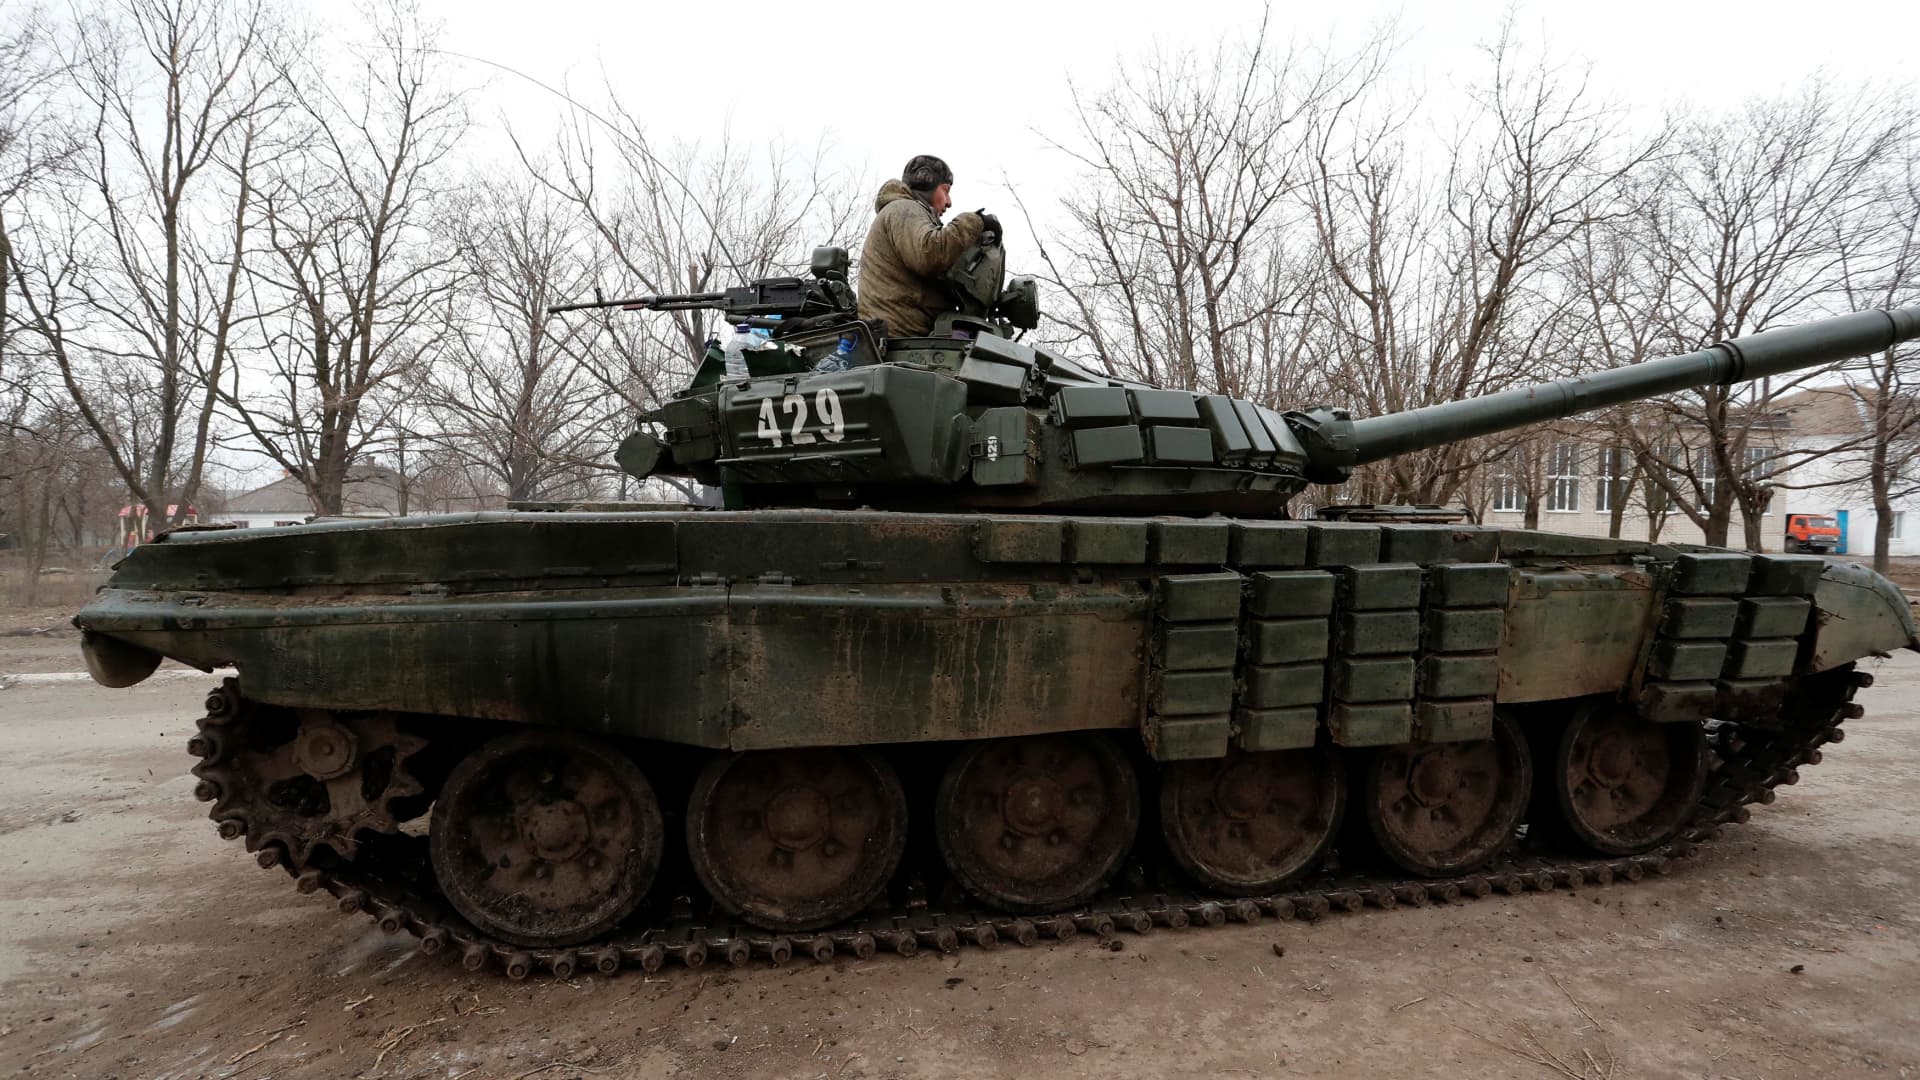 A service member is seen atop of a tank while pro-Russian troops gather in the separatist-controlled settlement of Mykolaivka (Nikolaevka), as Russia's invasion of Ukraine continues, in the Donetsk region, Ukraine March 1, 2022.